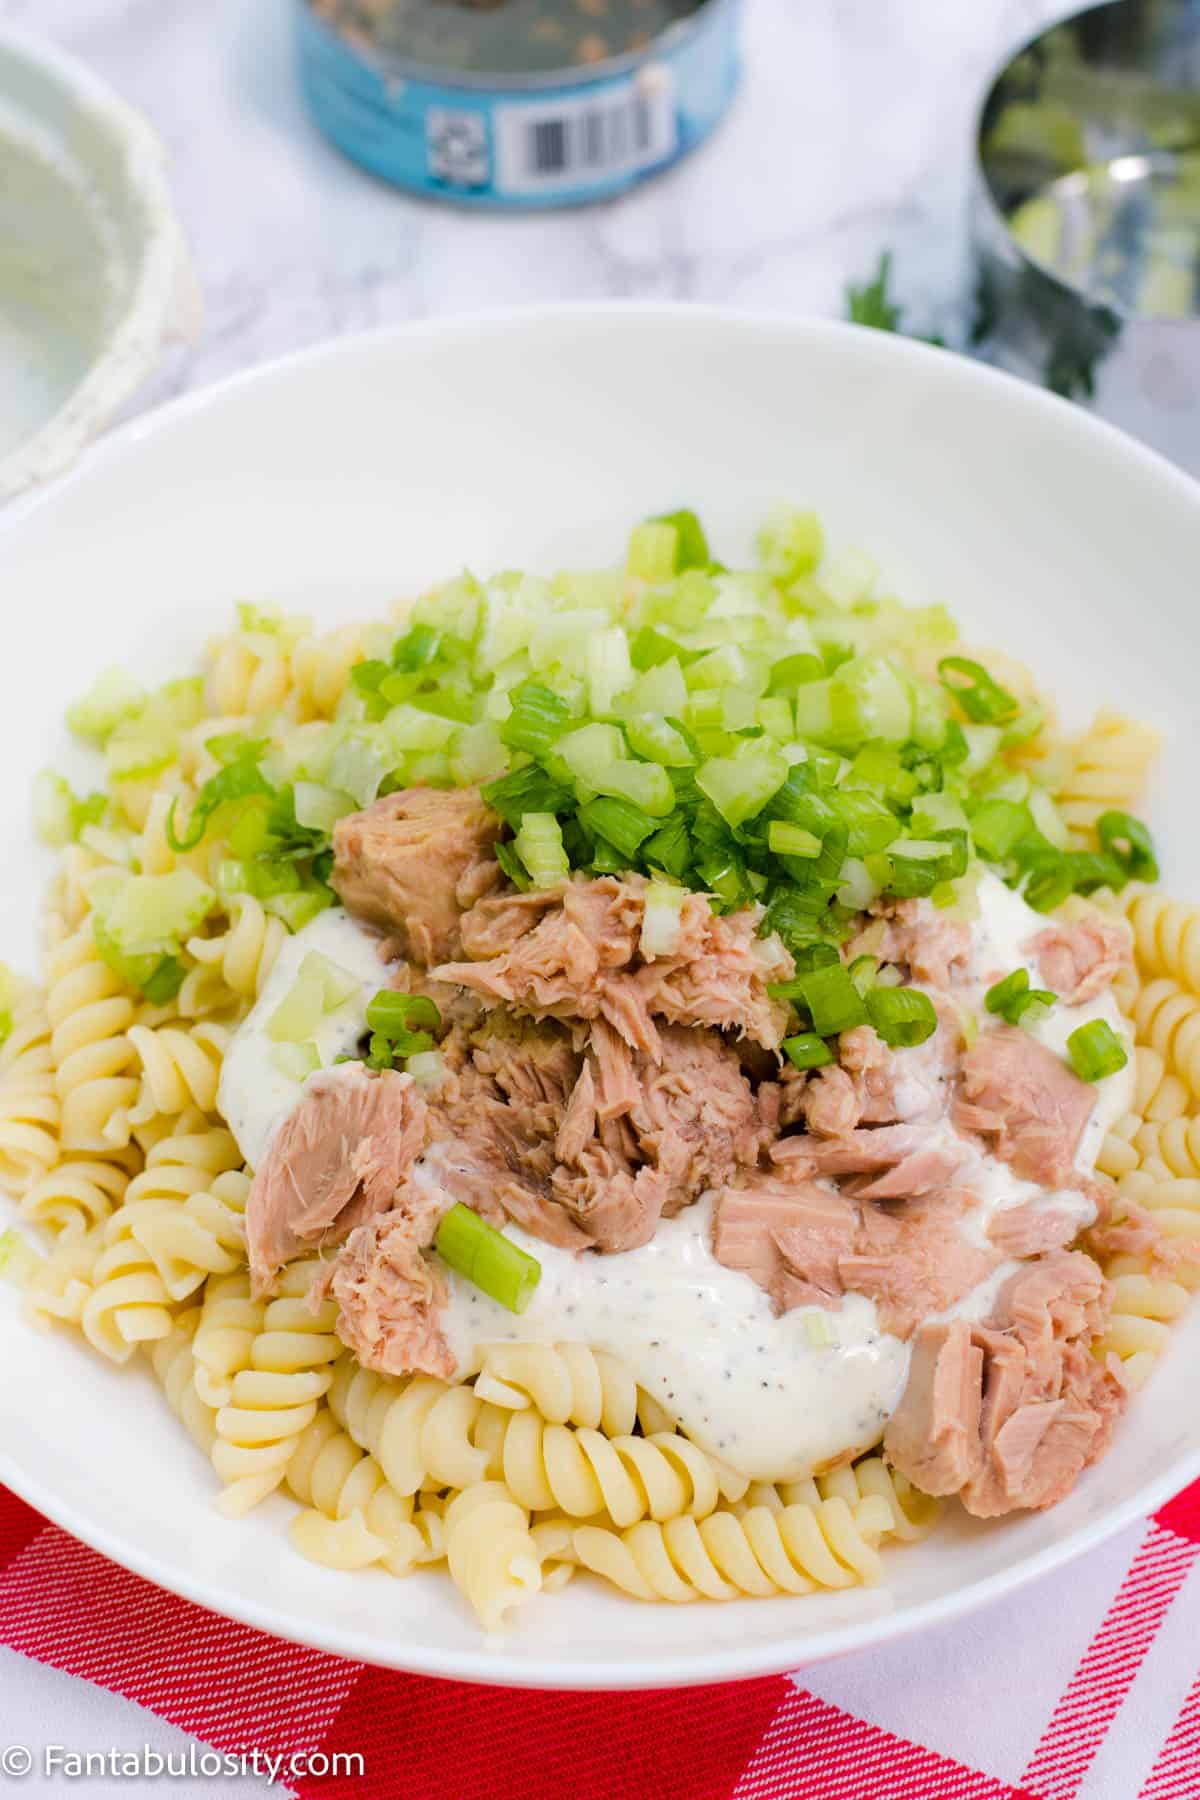 celery and green onion added to tuna pasta